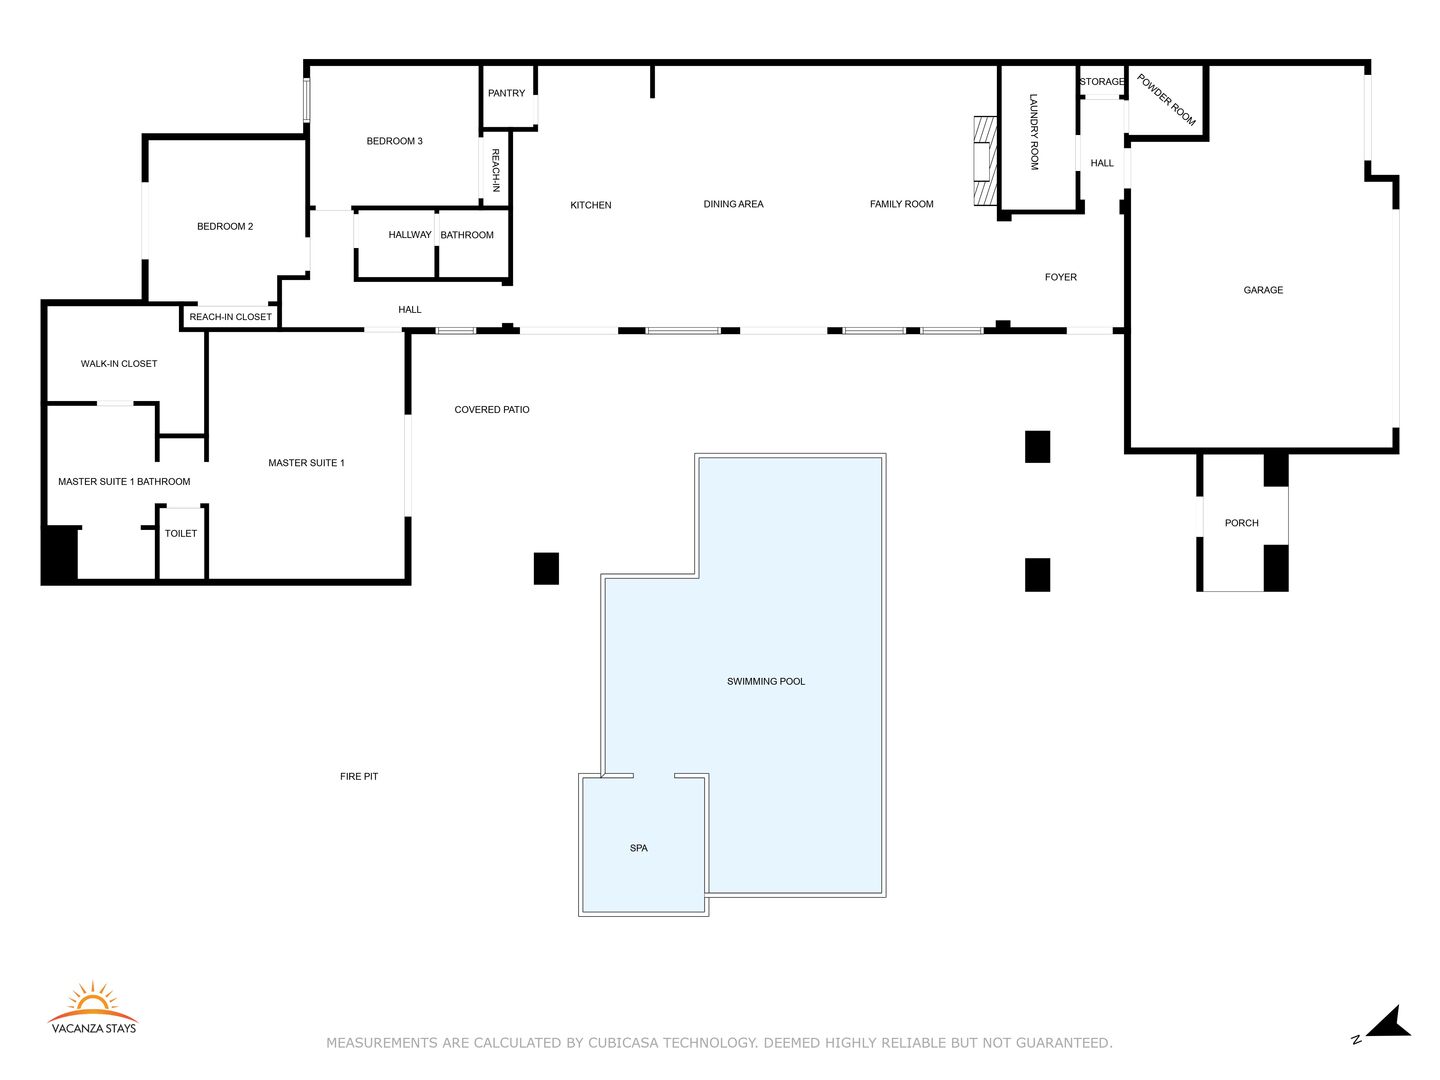 Get a better look at Palmer Retreat's layout from this floor plan!